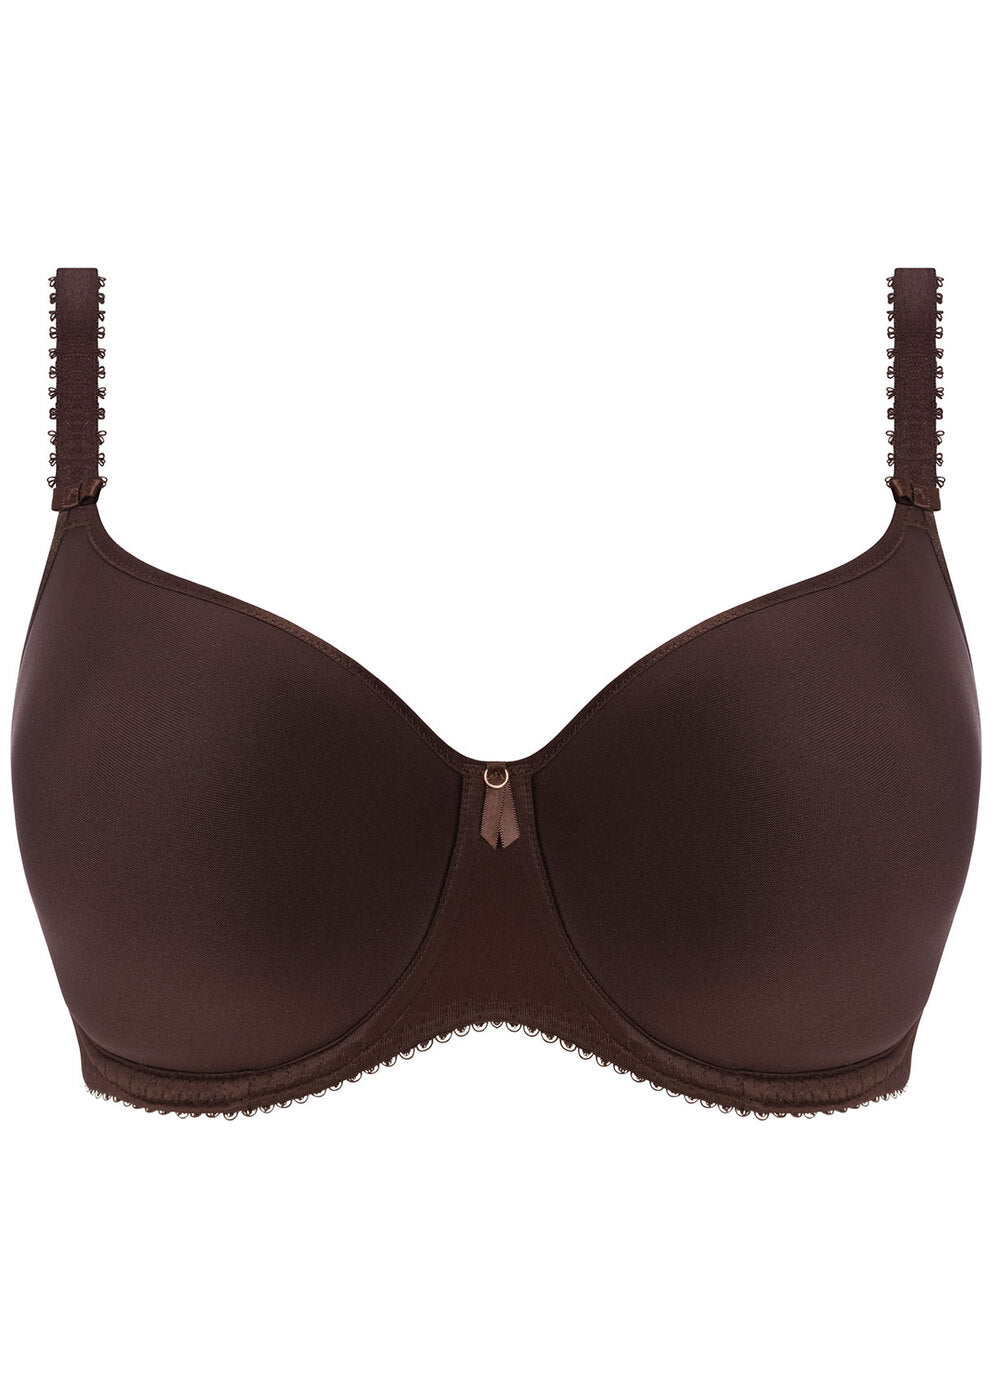 Rebecca Essentials Moulded Spacer In Chocolate - Fantasie